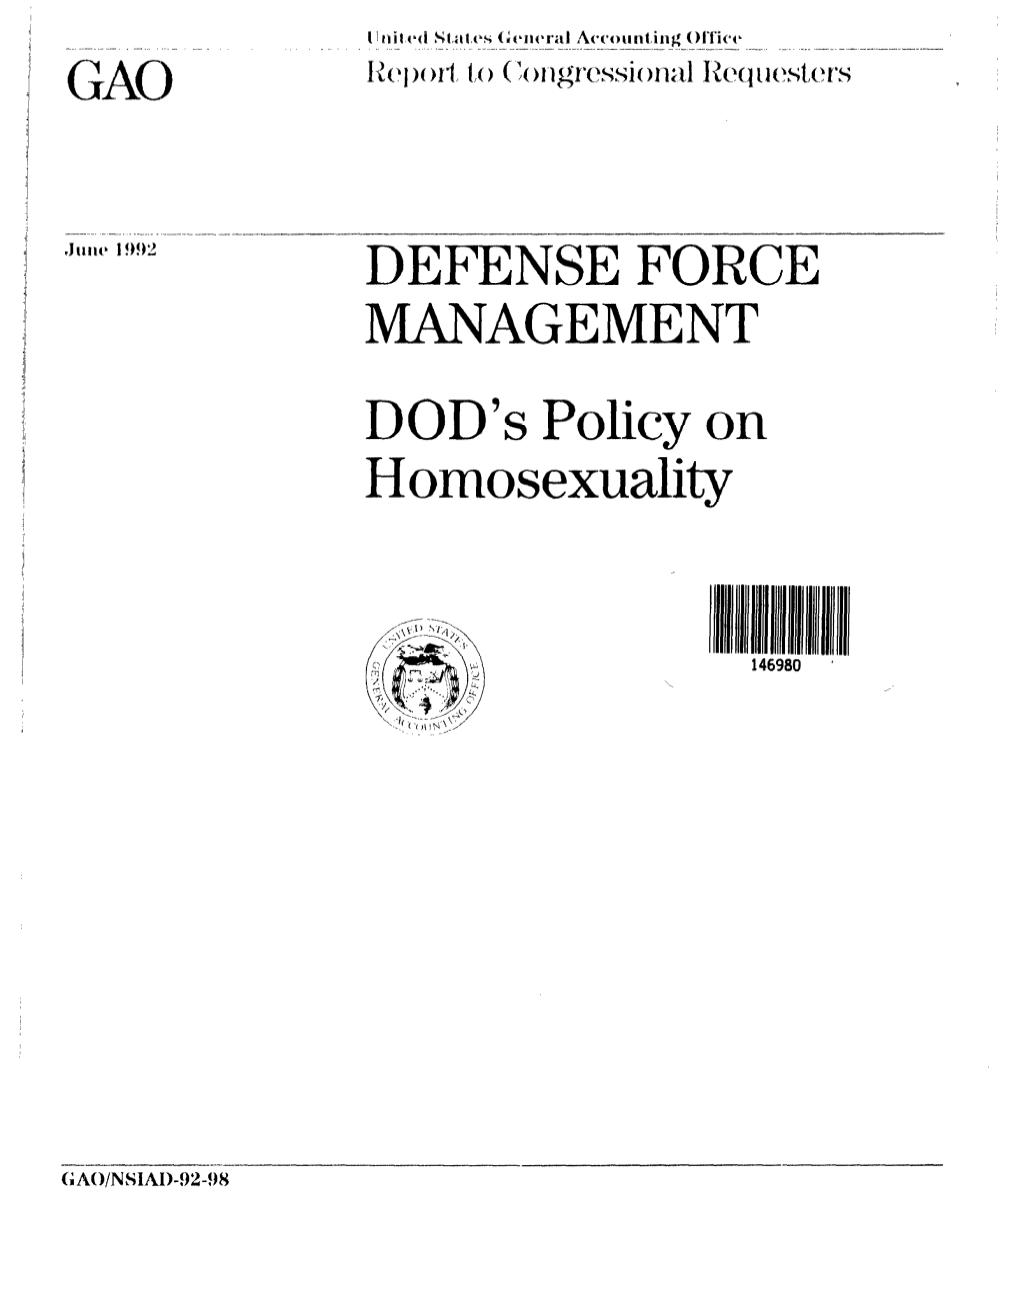 DOD's Policy on Homosexuality